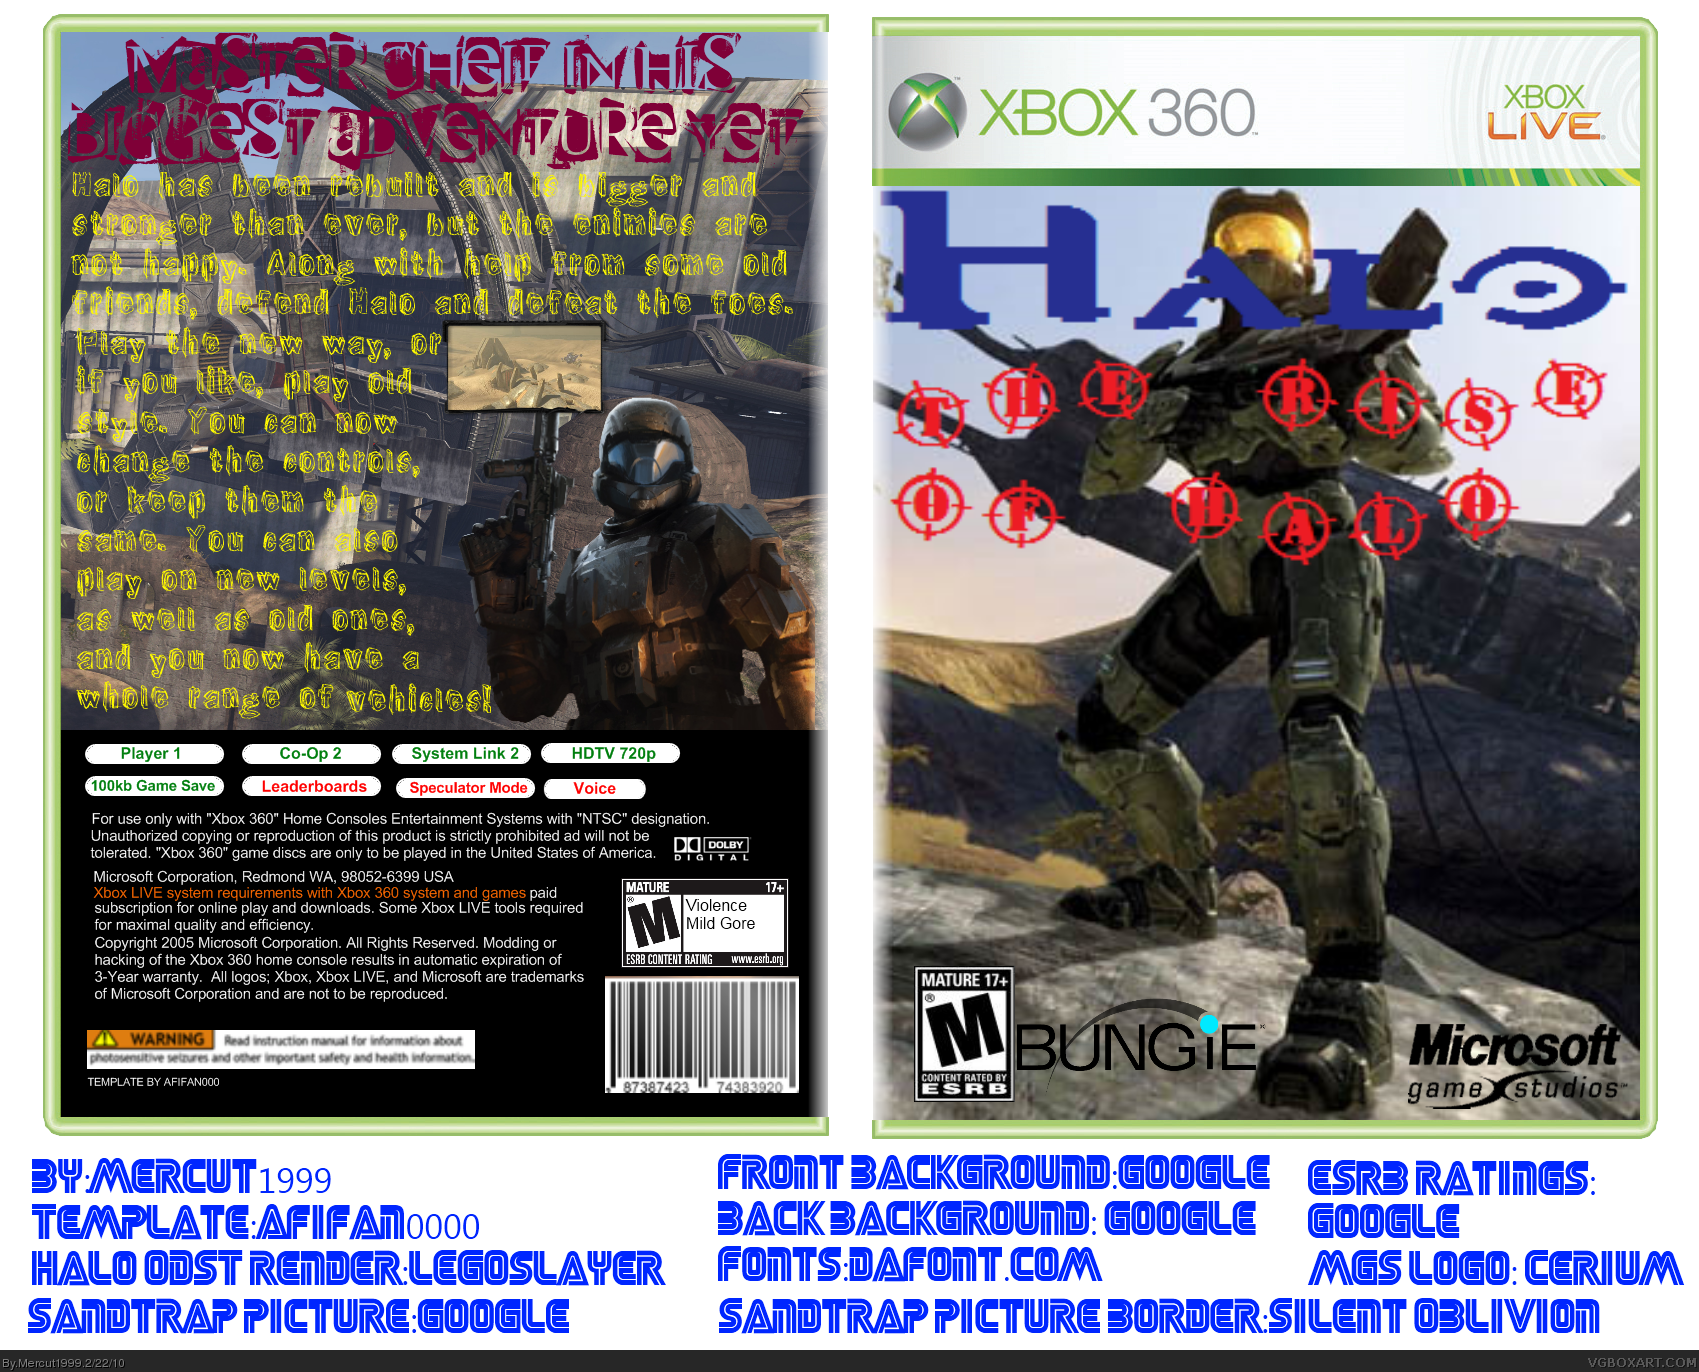 Halo: The Rise of Halo box cover